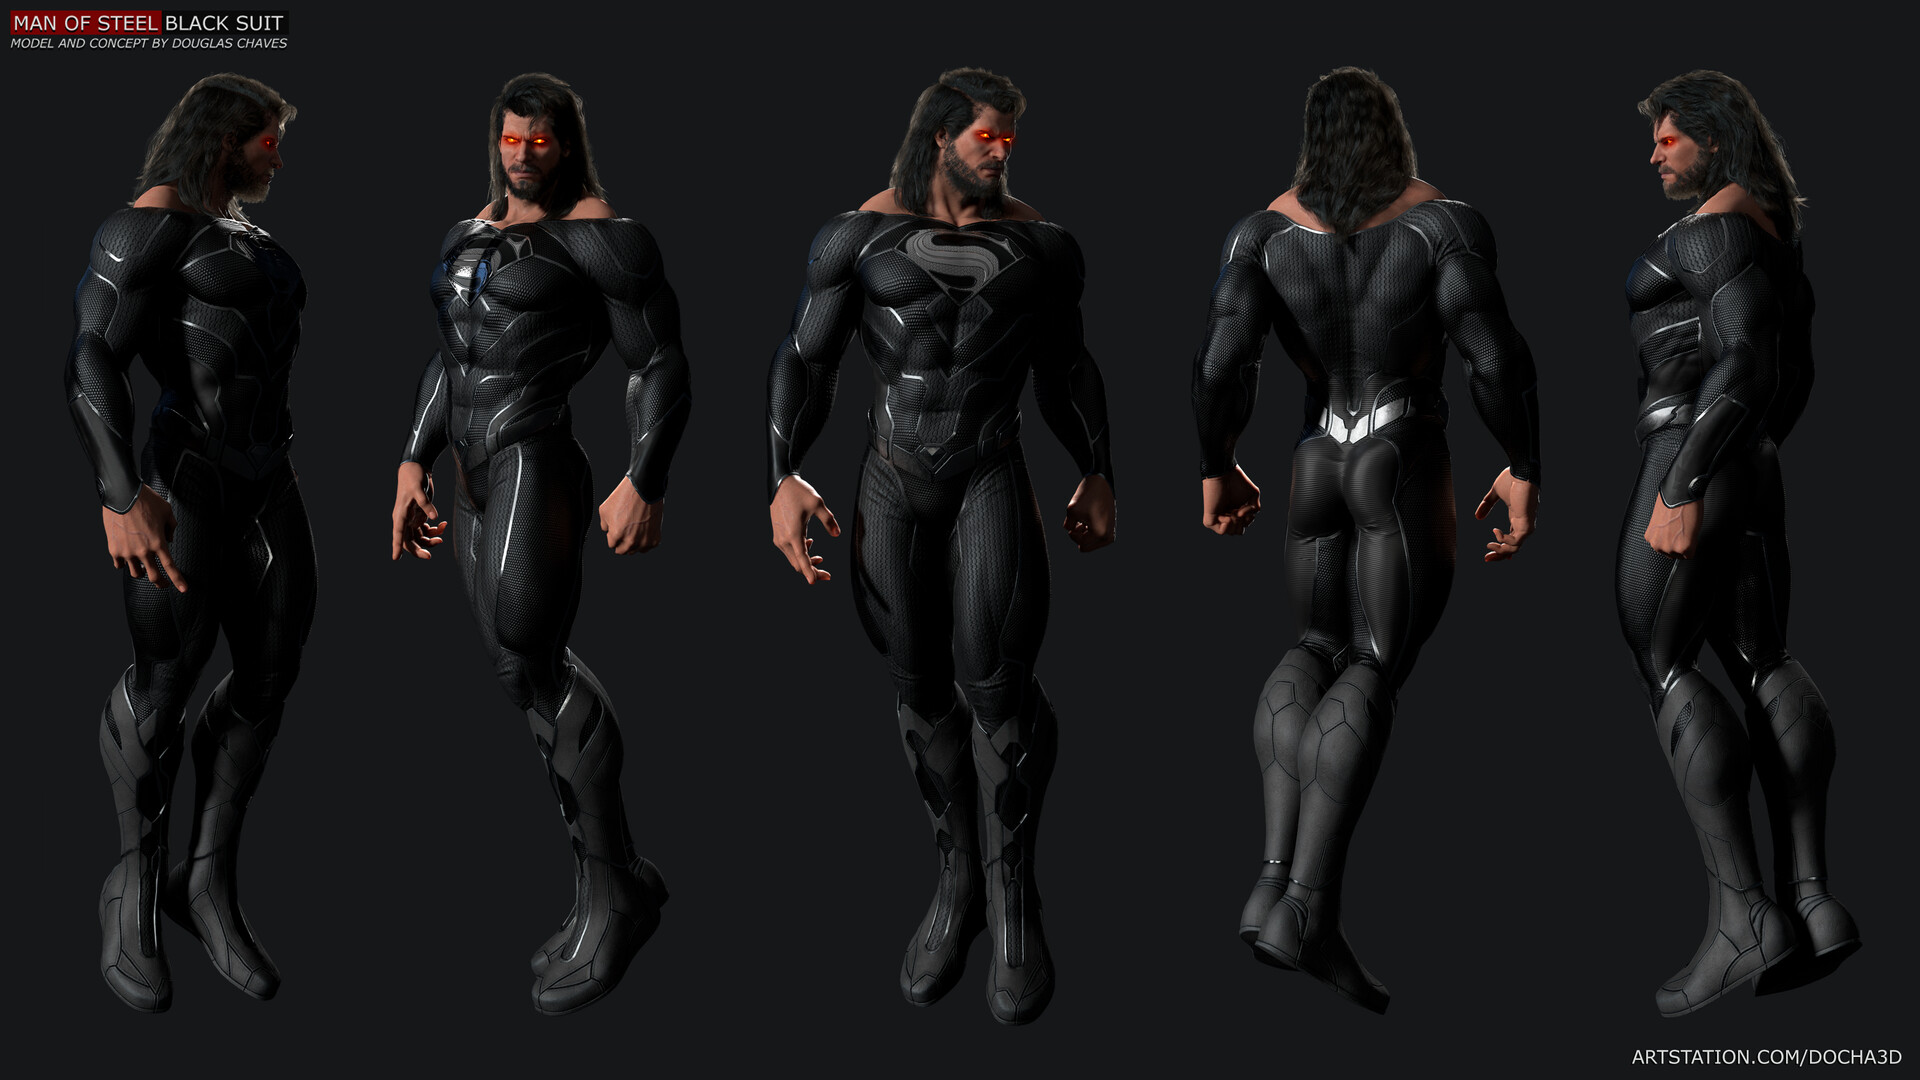 Man of Steel Black Suit by Douglas Chaves · 3dtotal · Learn, Create